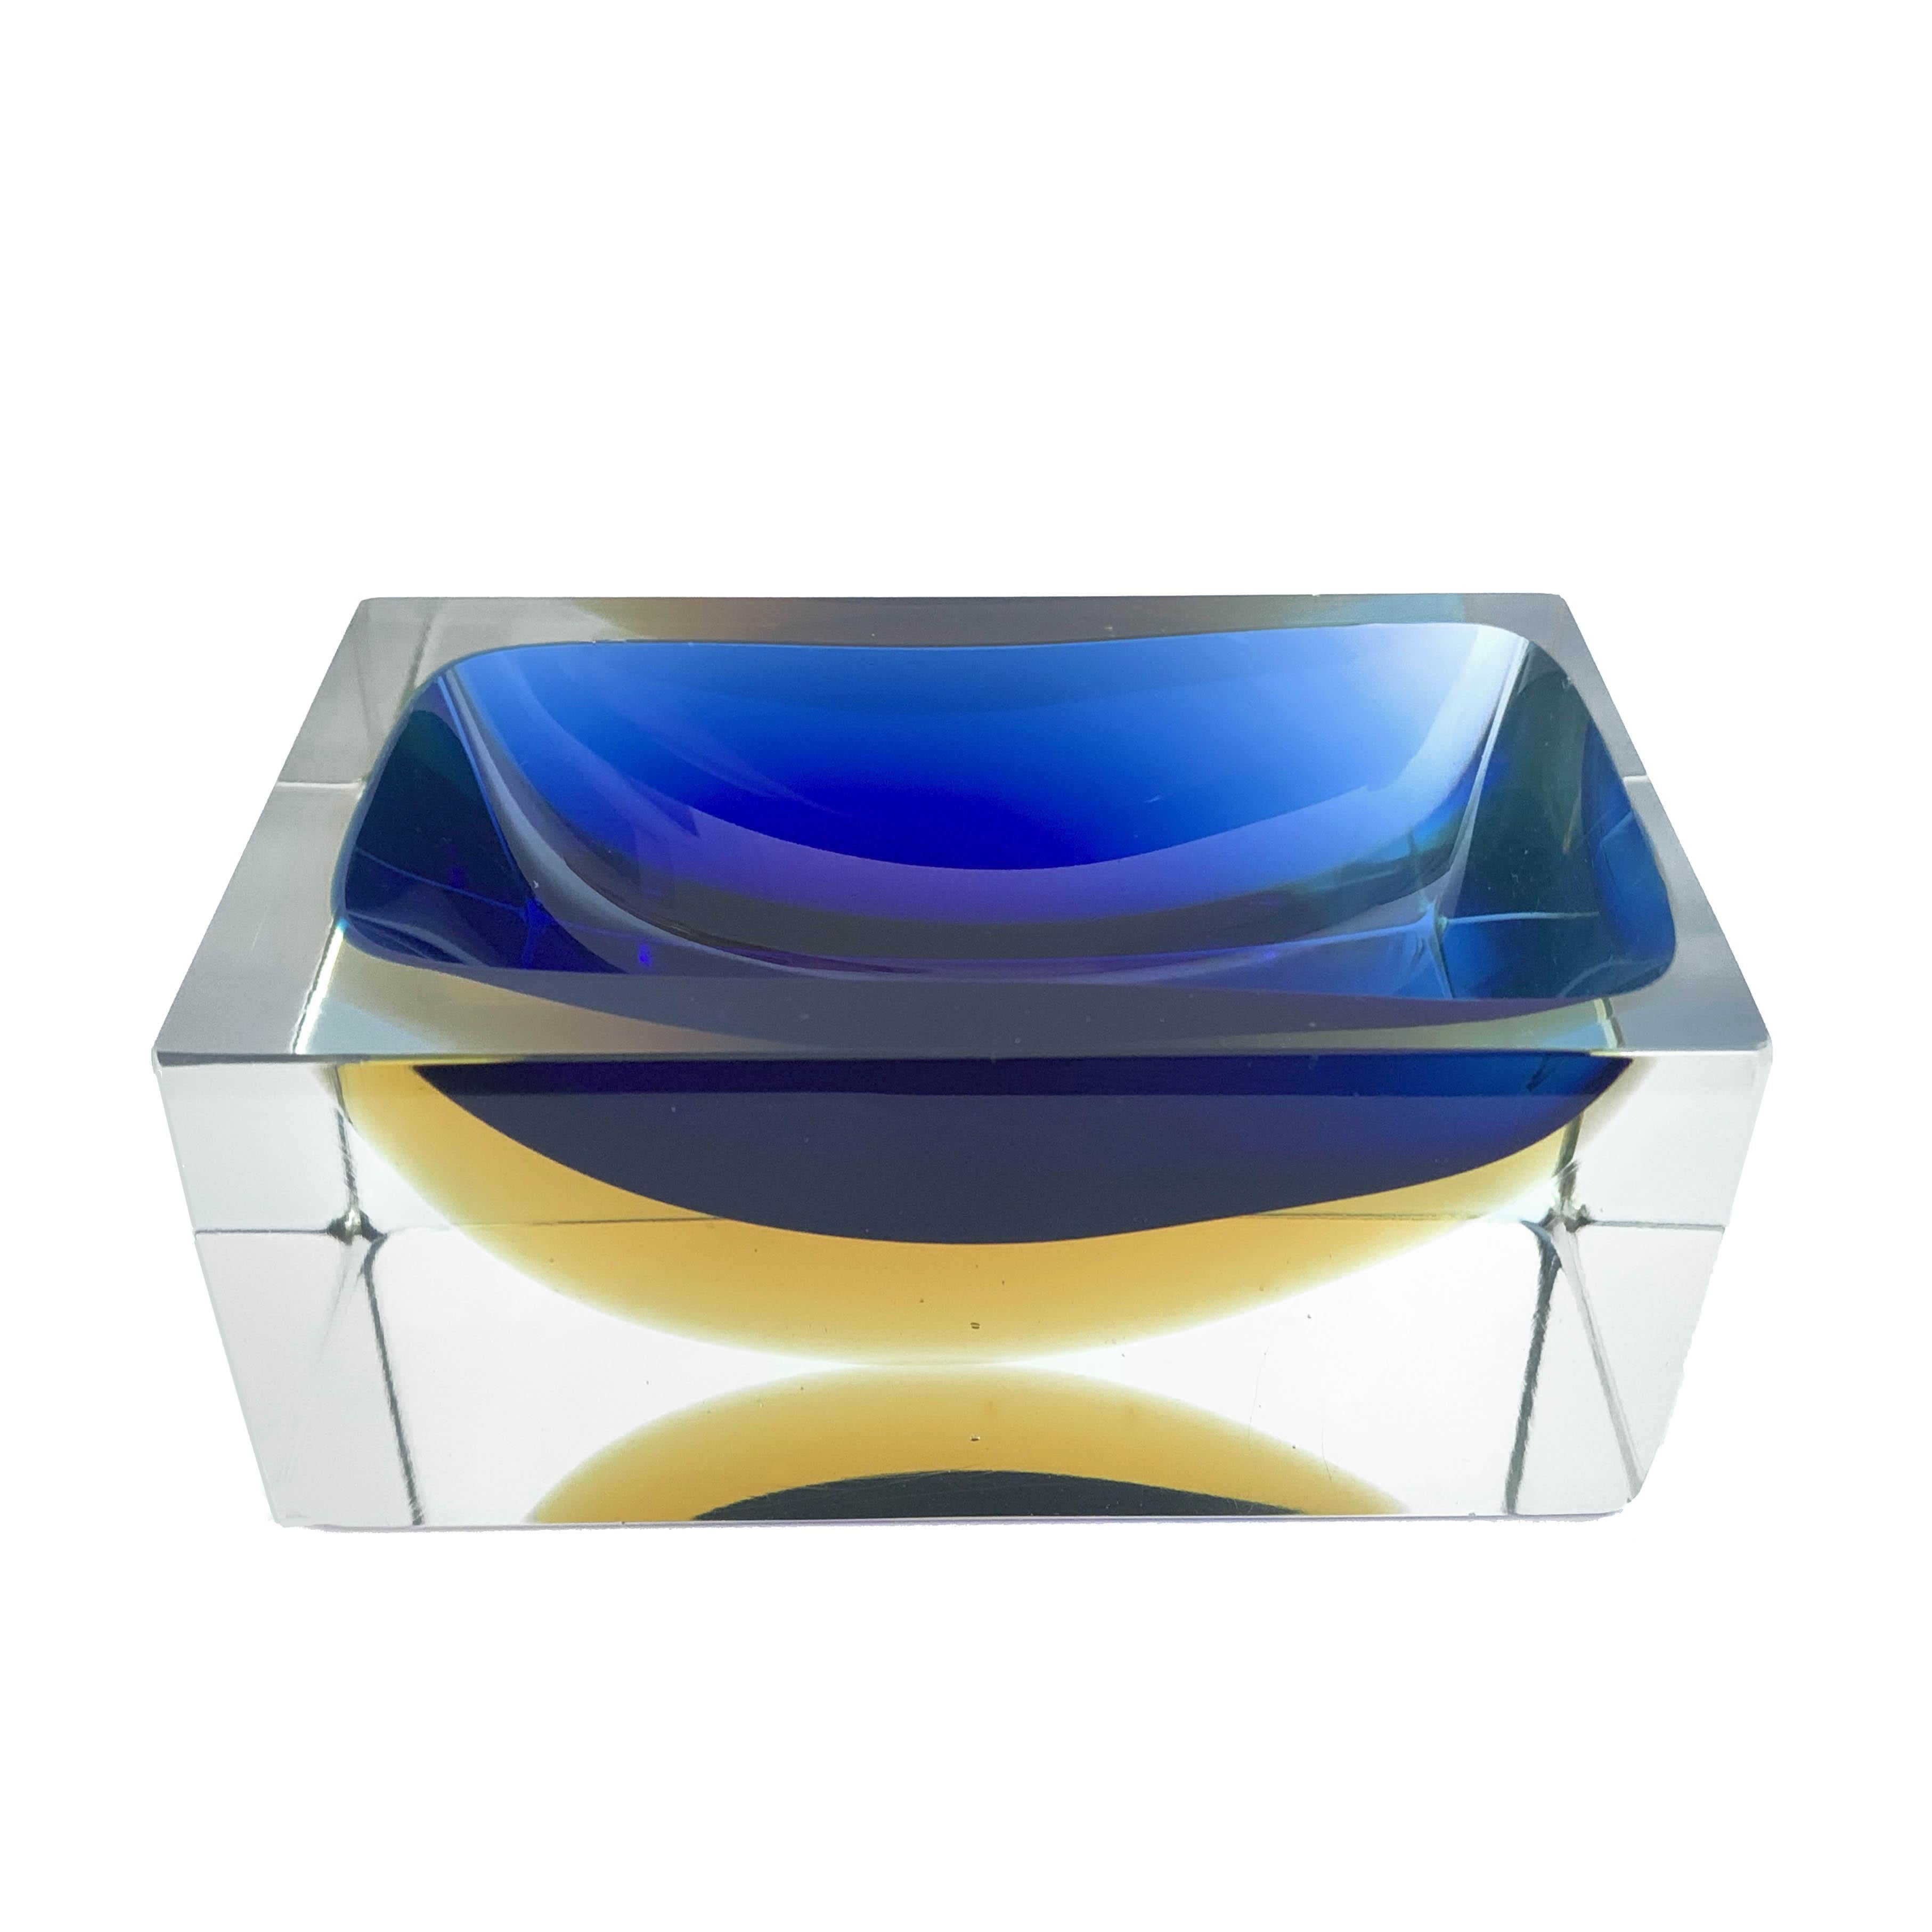 Italian Murano Sommerso Flavio Poli glass bowl or vide poche This small but wonderful Italian Murano Sommerso Flavio Poli glass bowl/dish/ vide poche in vivid colors of brilliant blue and yellow, clear Sommerso form will be a great addition to any